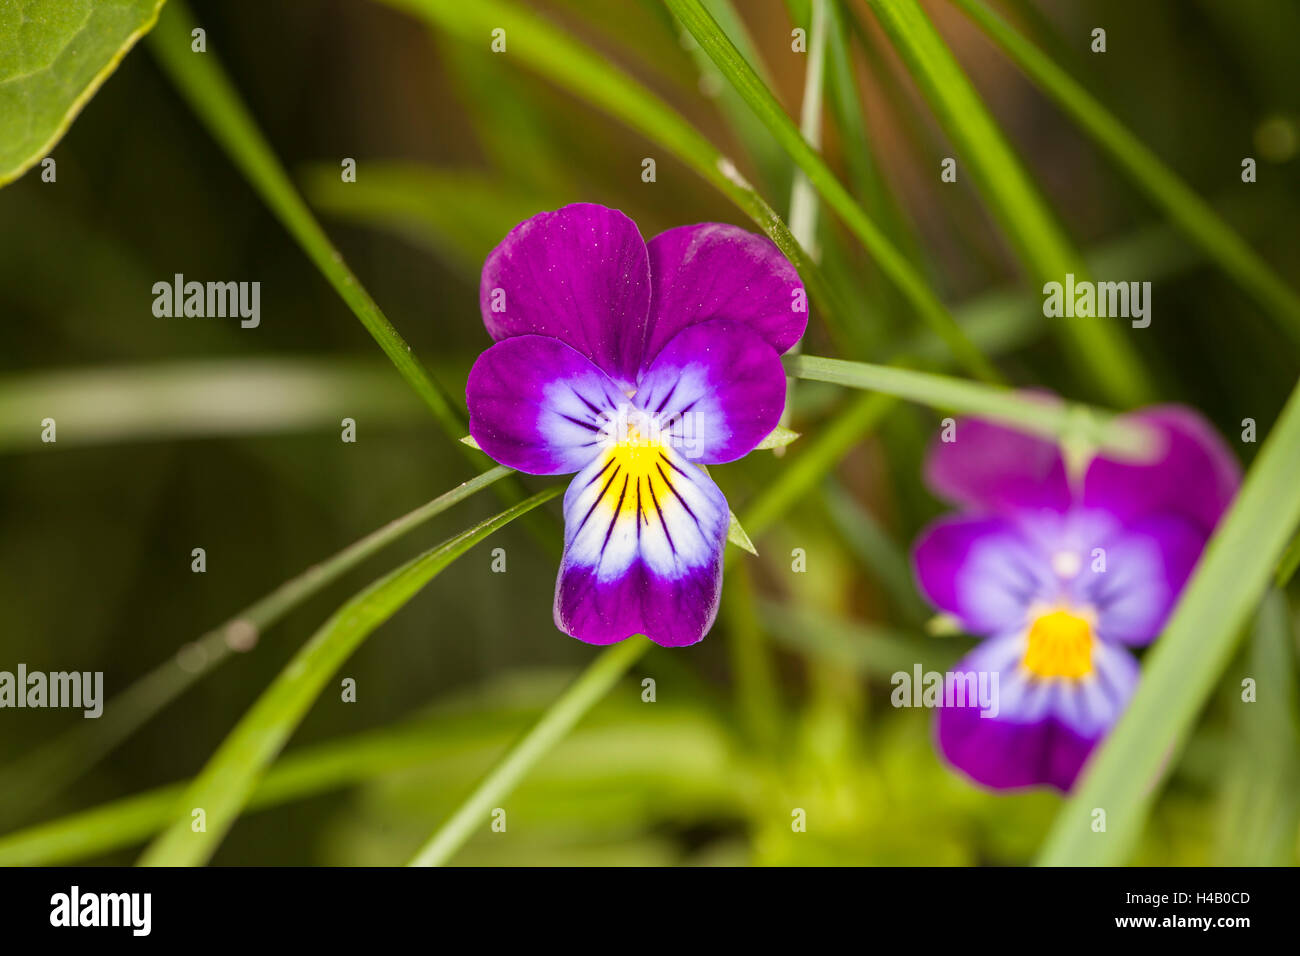 flower pansy Stock Photo